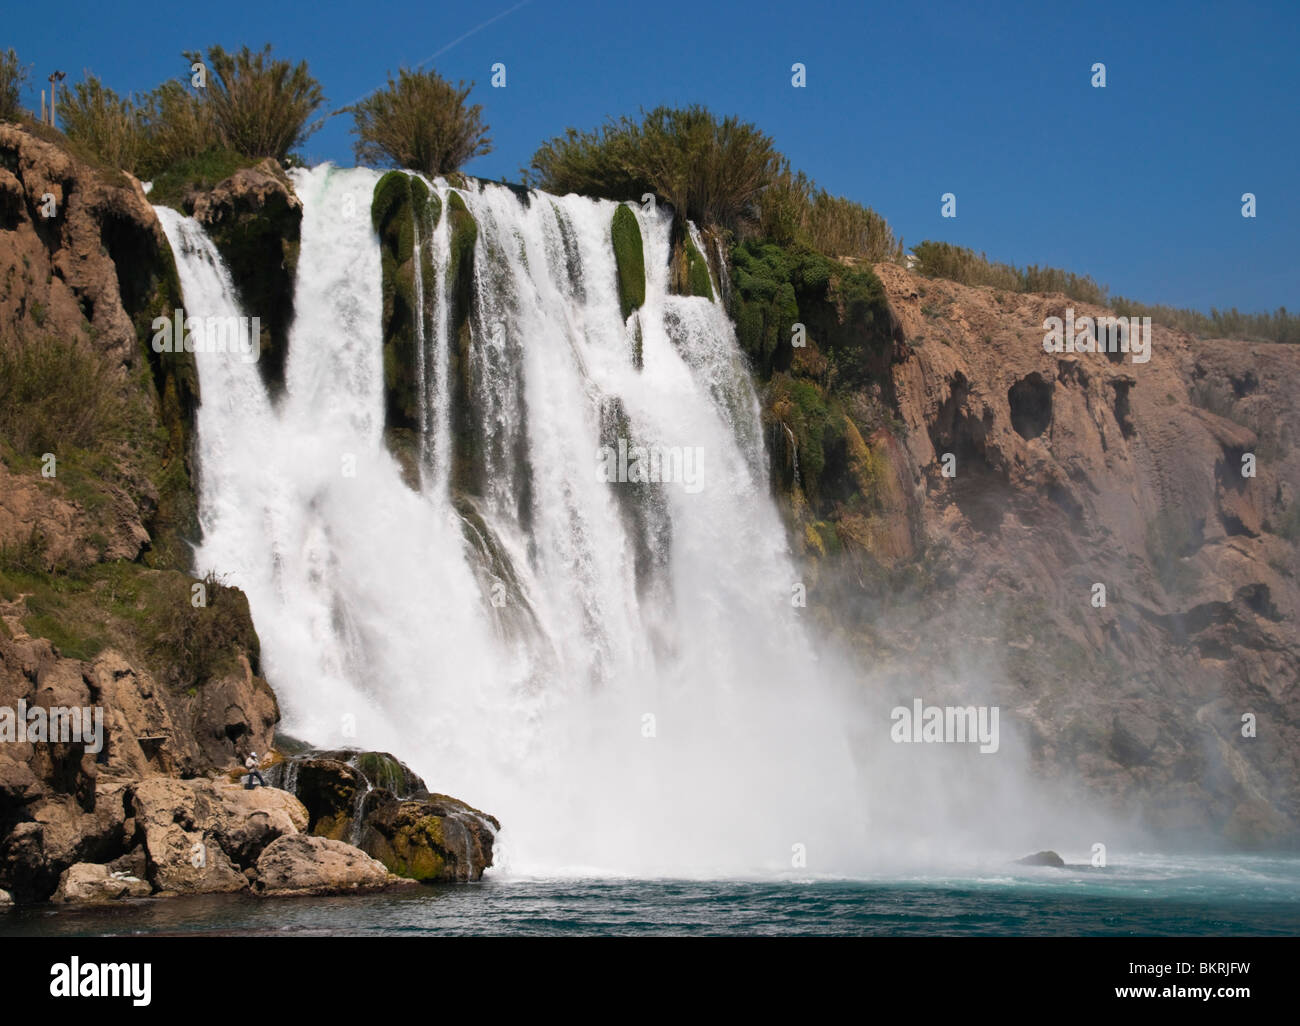 Düden lower waterfalls cascade in the sea at Antalya seen from boat trip Stock Photo